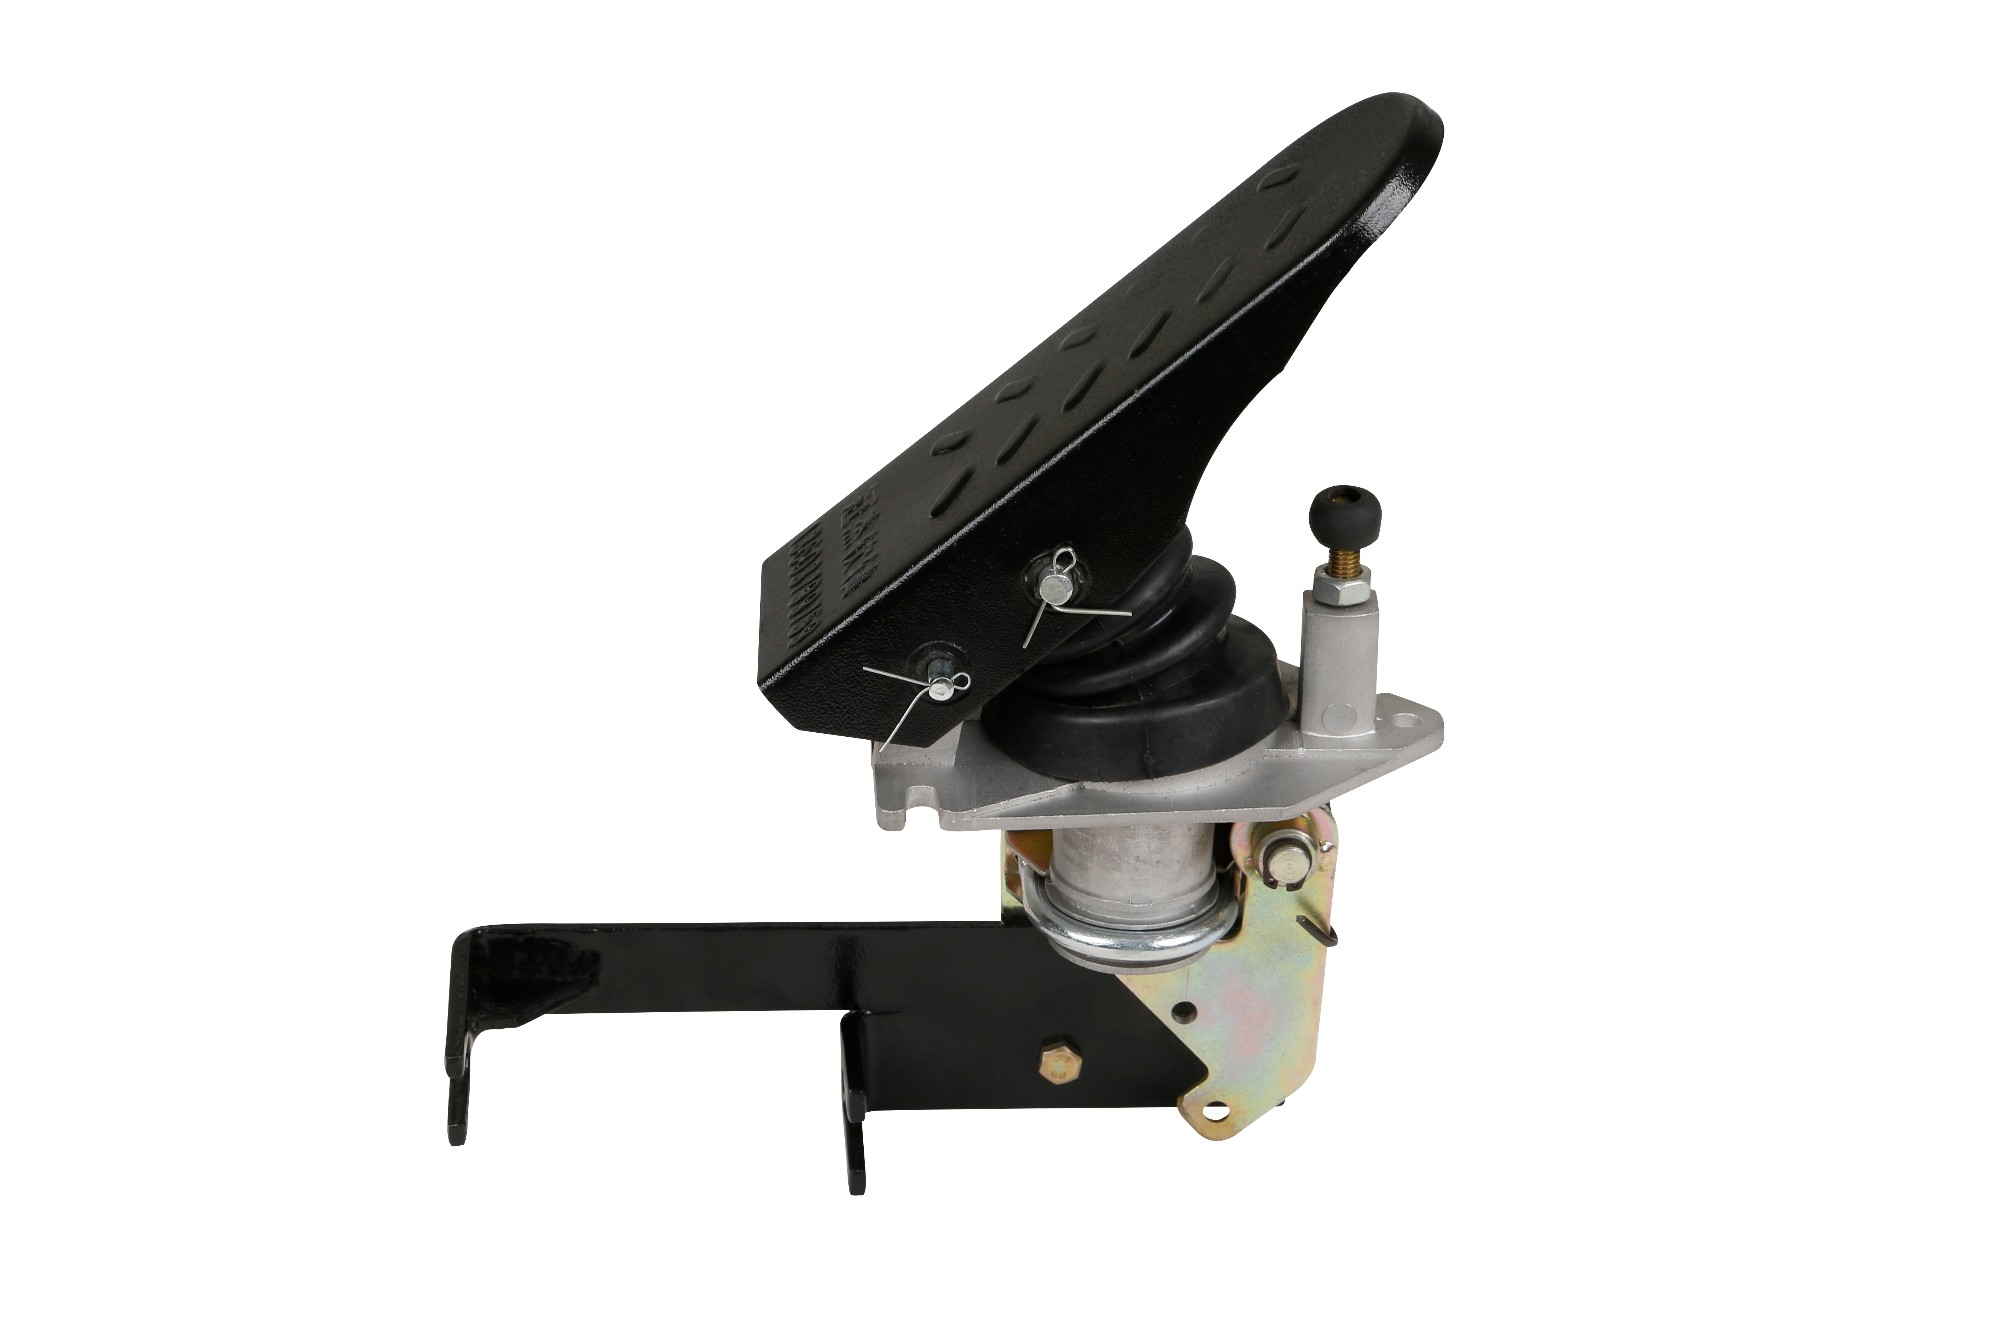 Bus foot throttle control assembly